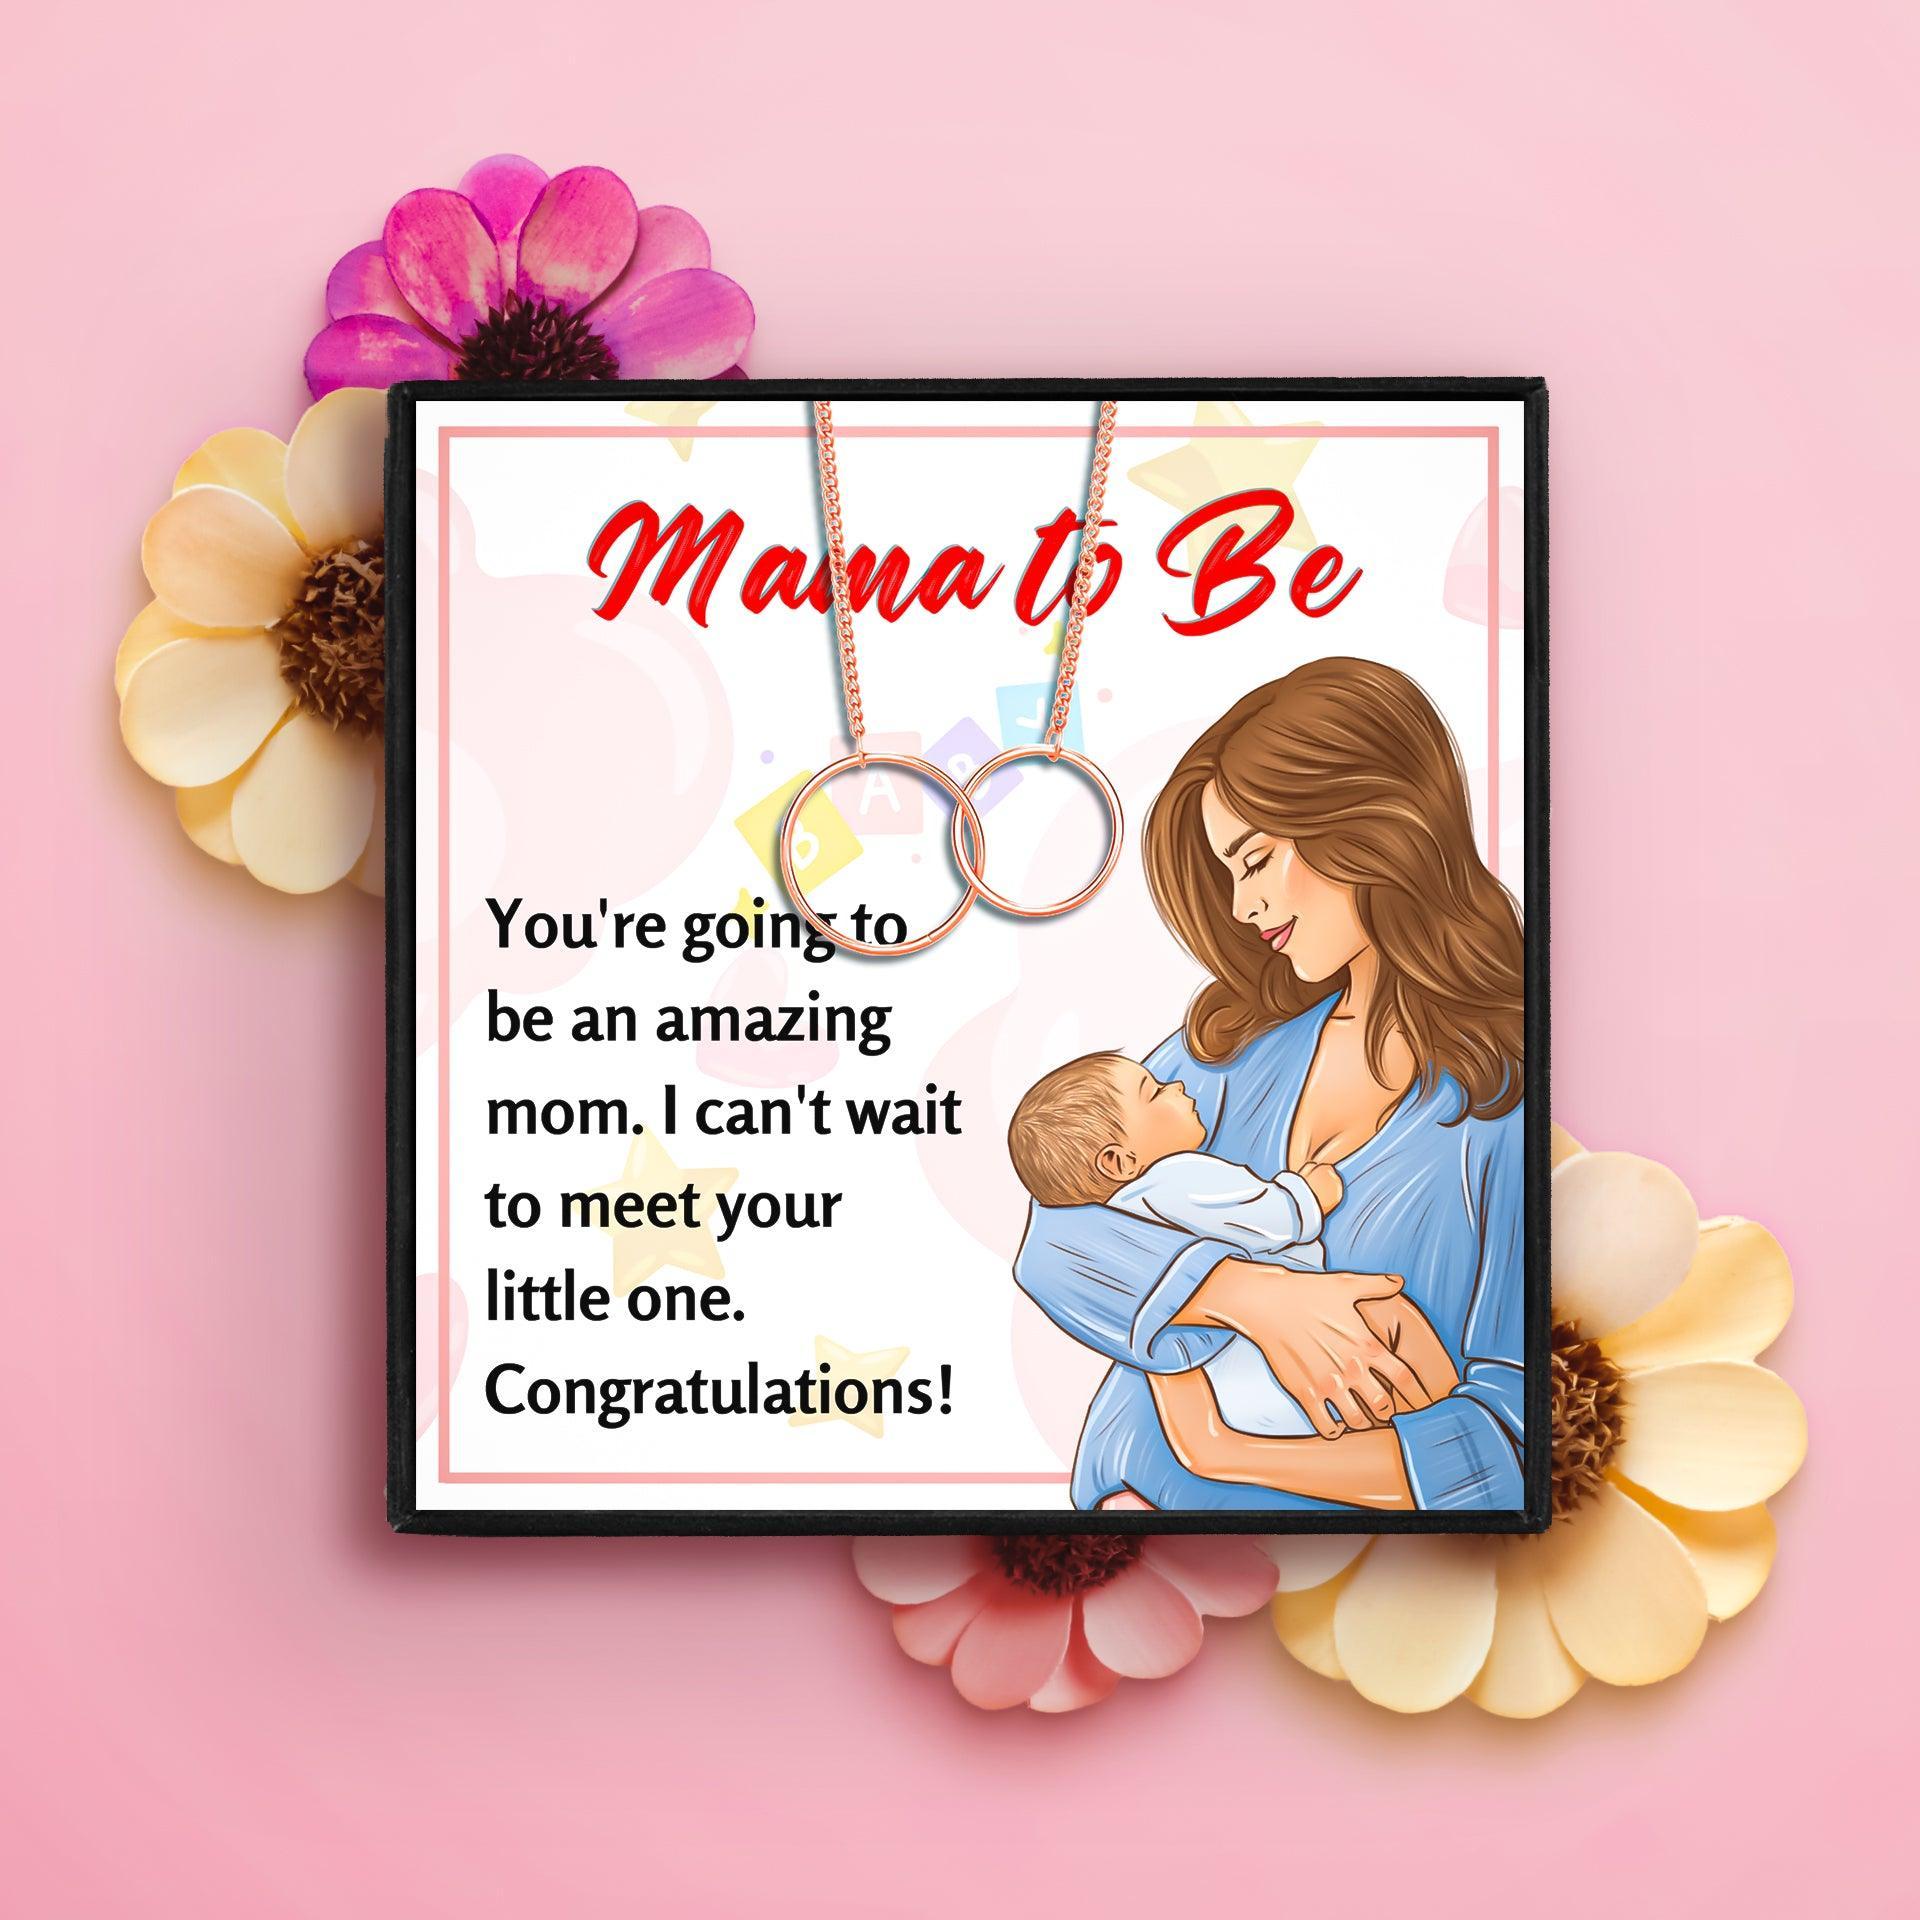 Meaningful Presents For Pregnant Women in 2023 | Meaningful Presents For Pregnant Women - undefined | Gifts for Pregnant Women, mama to be necklace, mom to be necklace, Mommy To Be Necklace, New Mom Jewelry | From Hunny Life | hunnylife.com